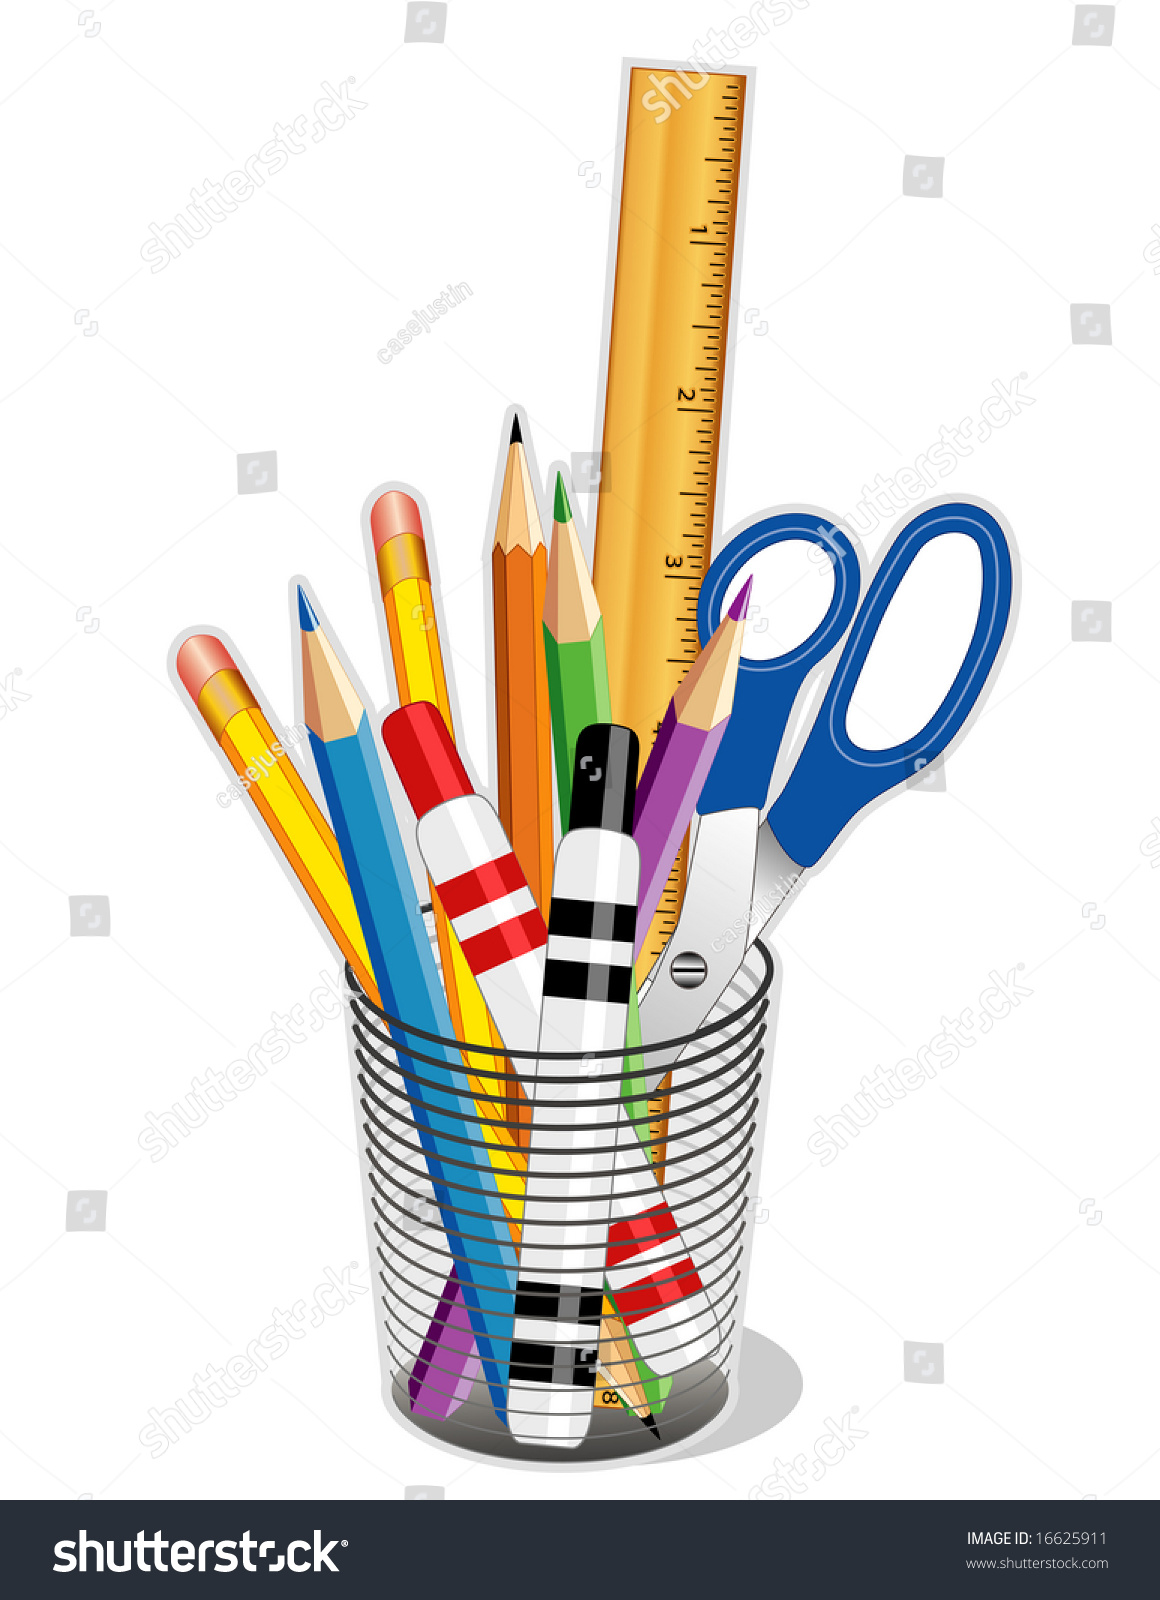 Writing And Drawing Tools In A Desk Organizer: Pencils, Scissors, Ruler ...